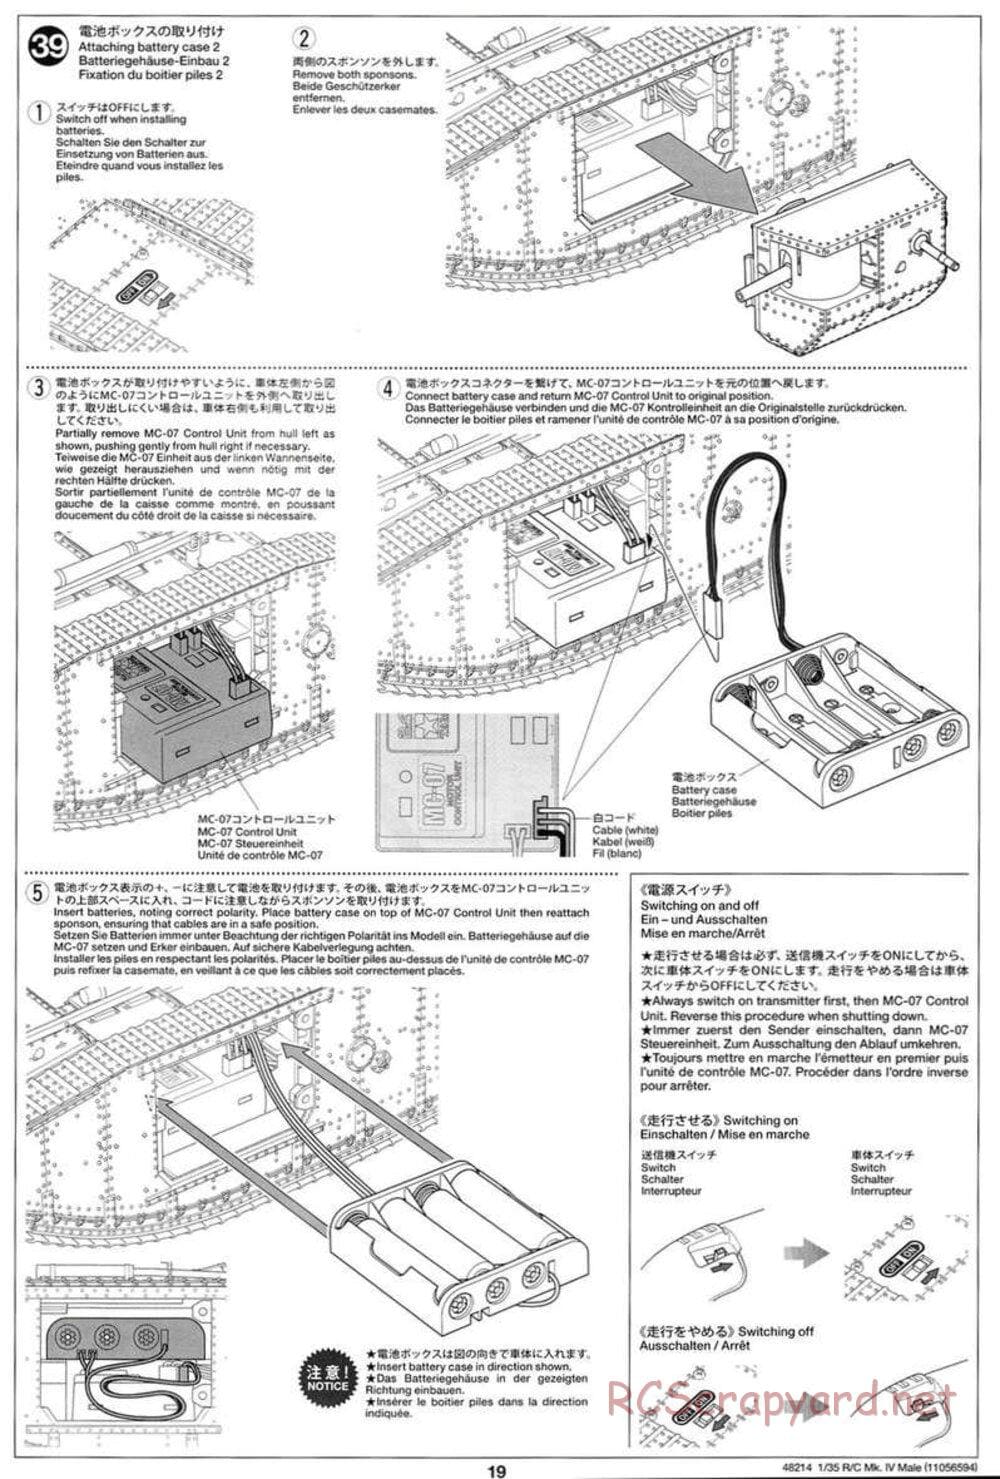 Tamiya - WWI British Tank Mark IV Male - 1/35 Scale Chassis - Manual - Page 19